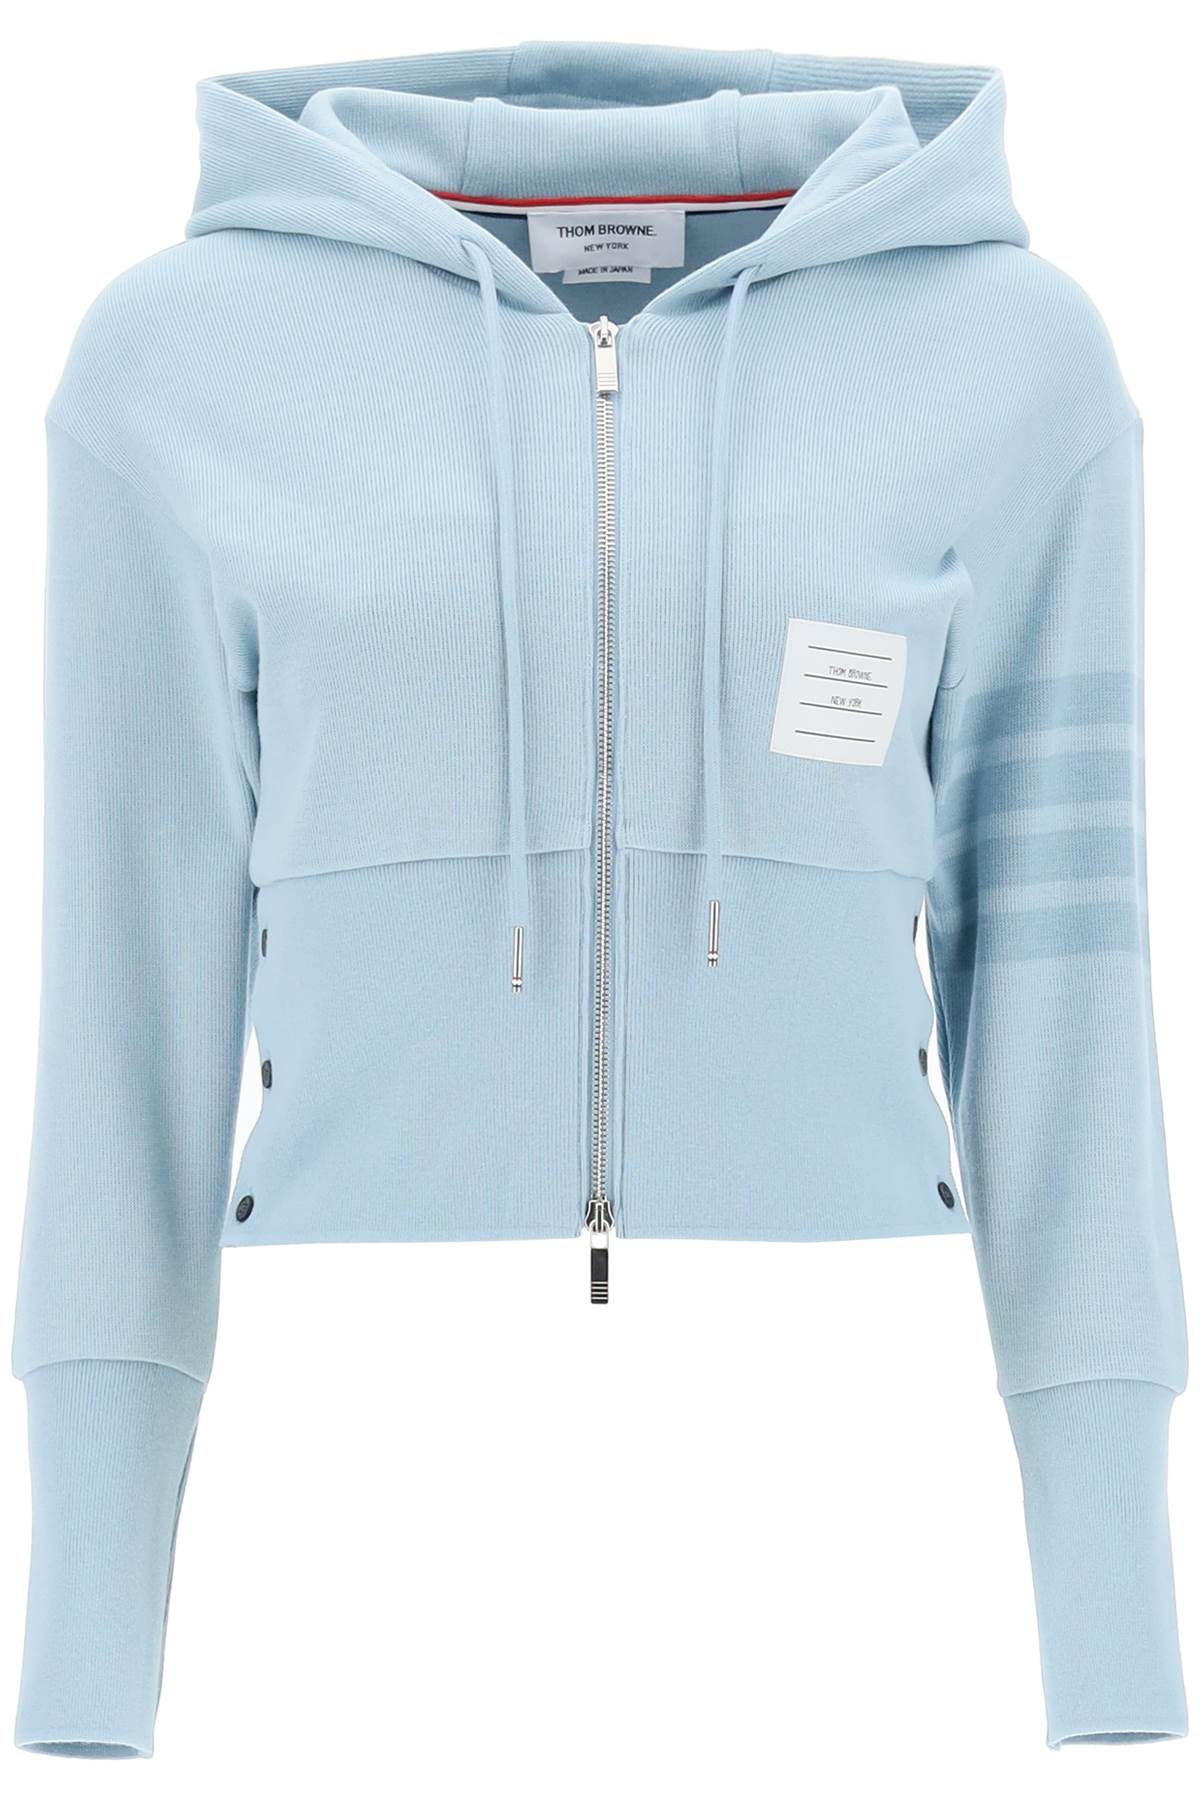 THOM BROWNE Women's Light Blue Cropped Hoodie with 4-Bar Sleeve Design